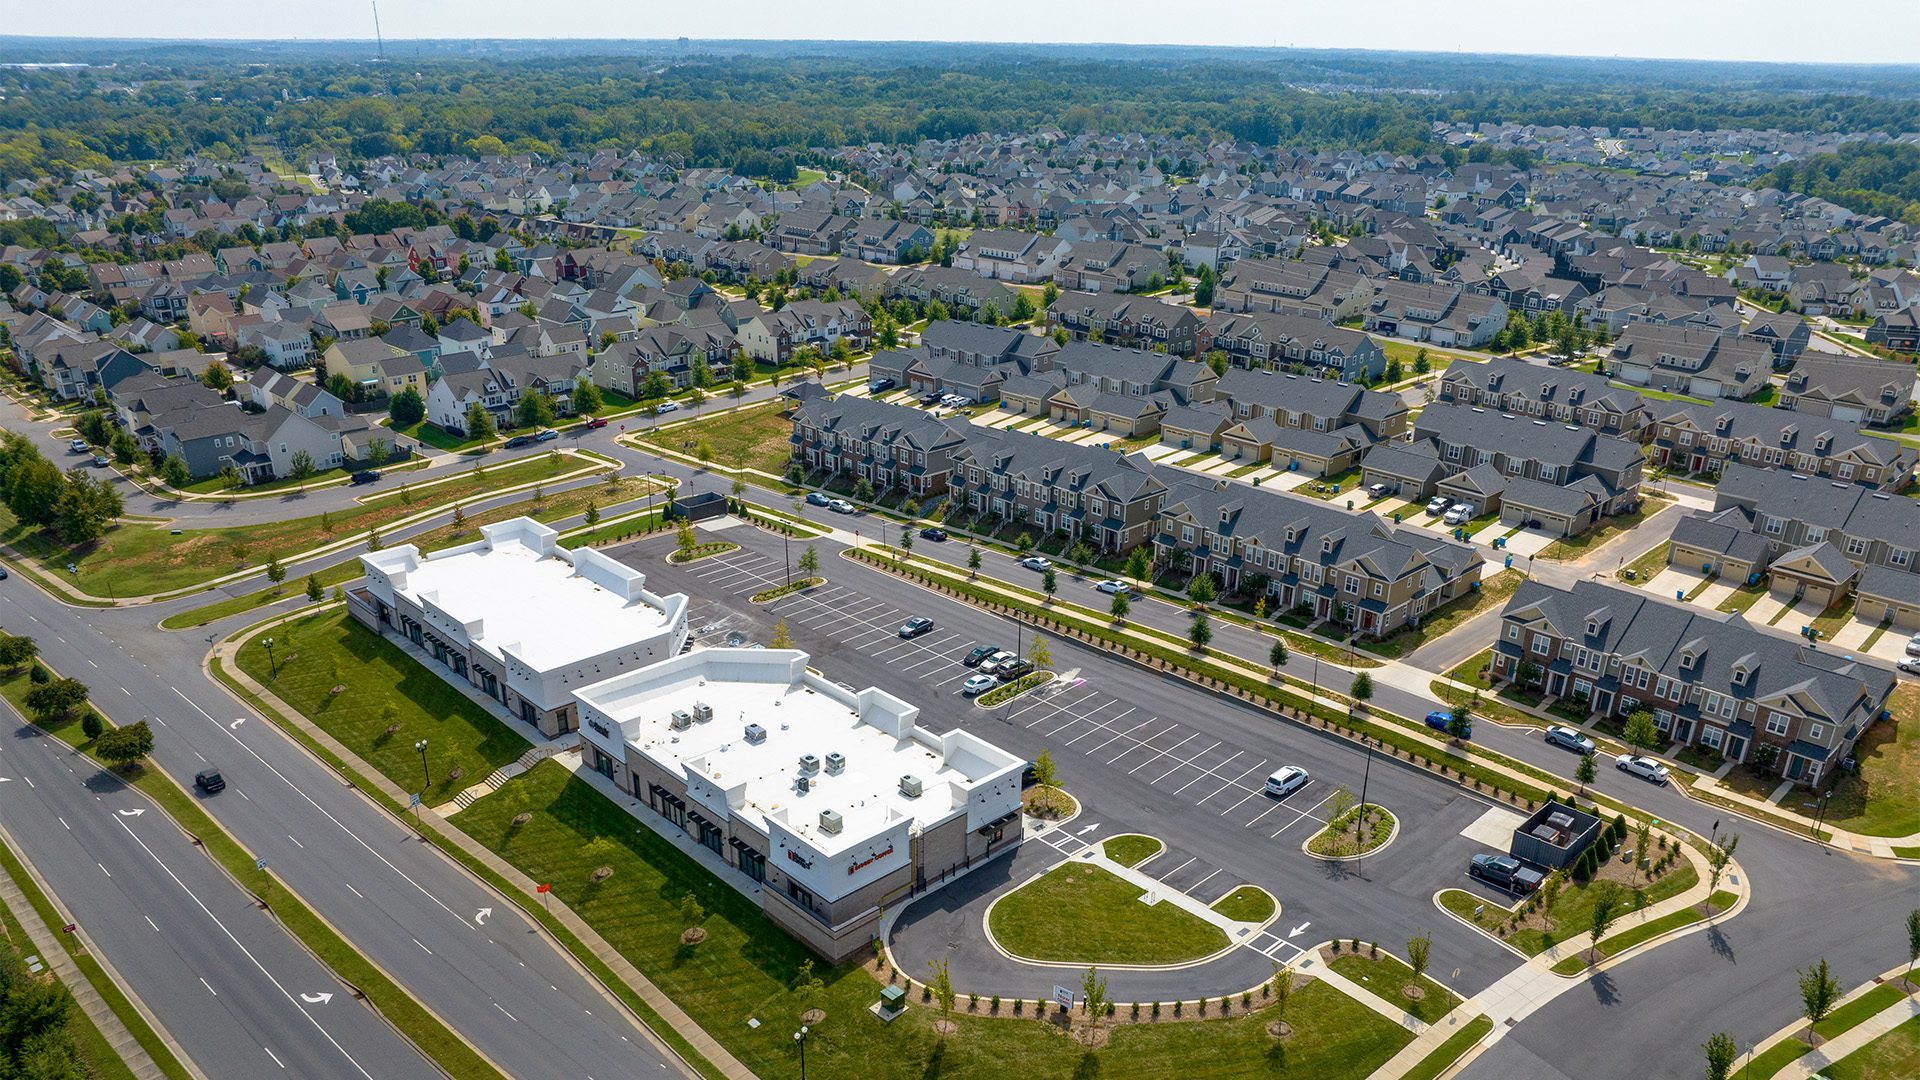 Shoppes at McCullough buildings in aerial with McCullough neighborhood rooftops in background